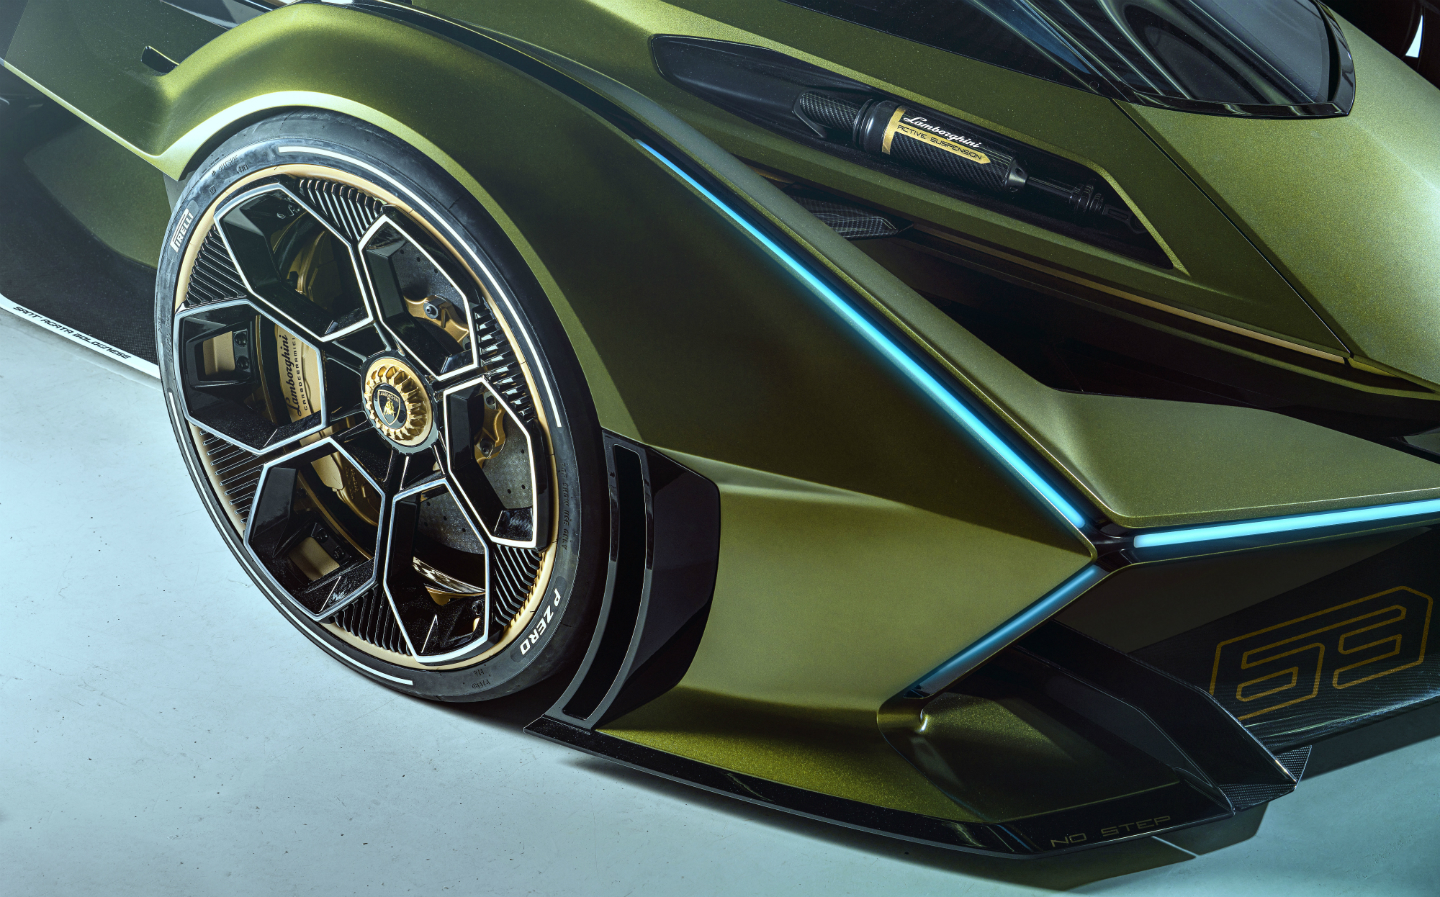 The Lambo V12 Vision Gran Turismo is a racing car too wild for reality